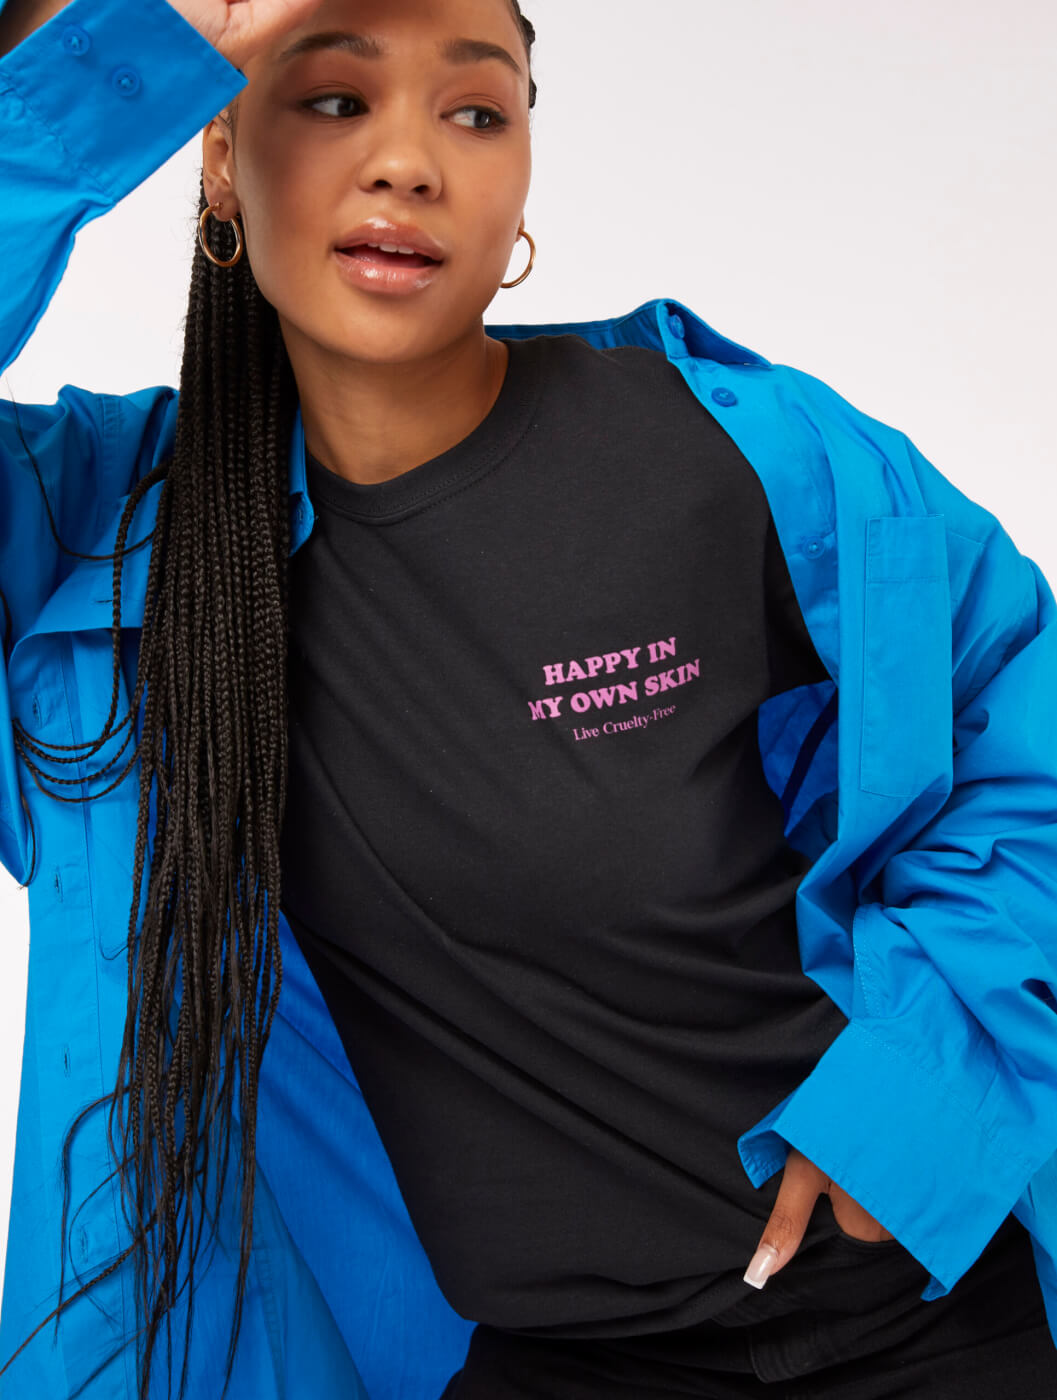 Skinnydip London and PETA Join Forces for Cruelty-Free Fashion Collab